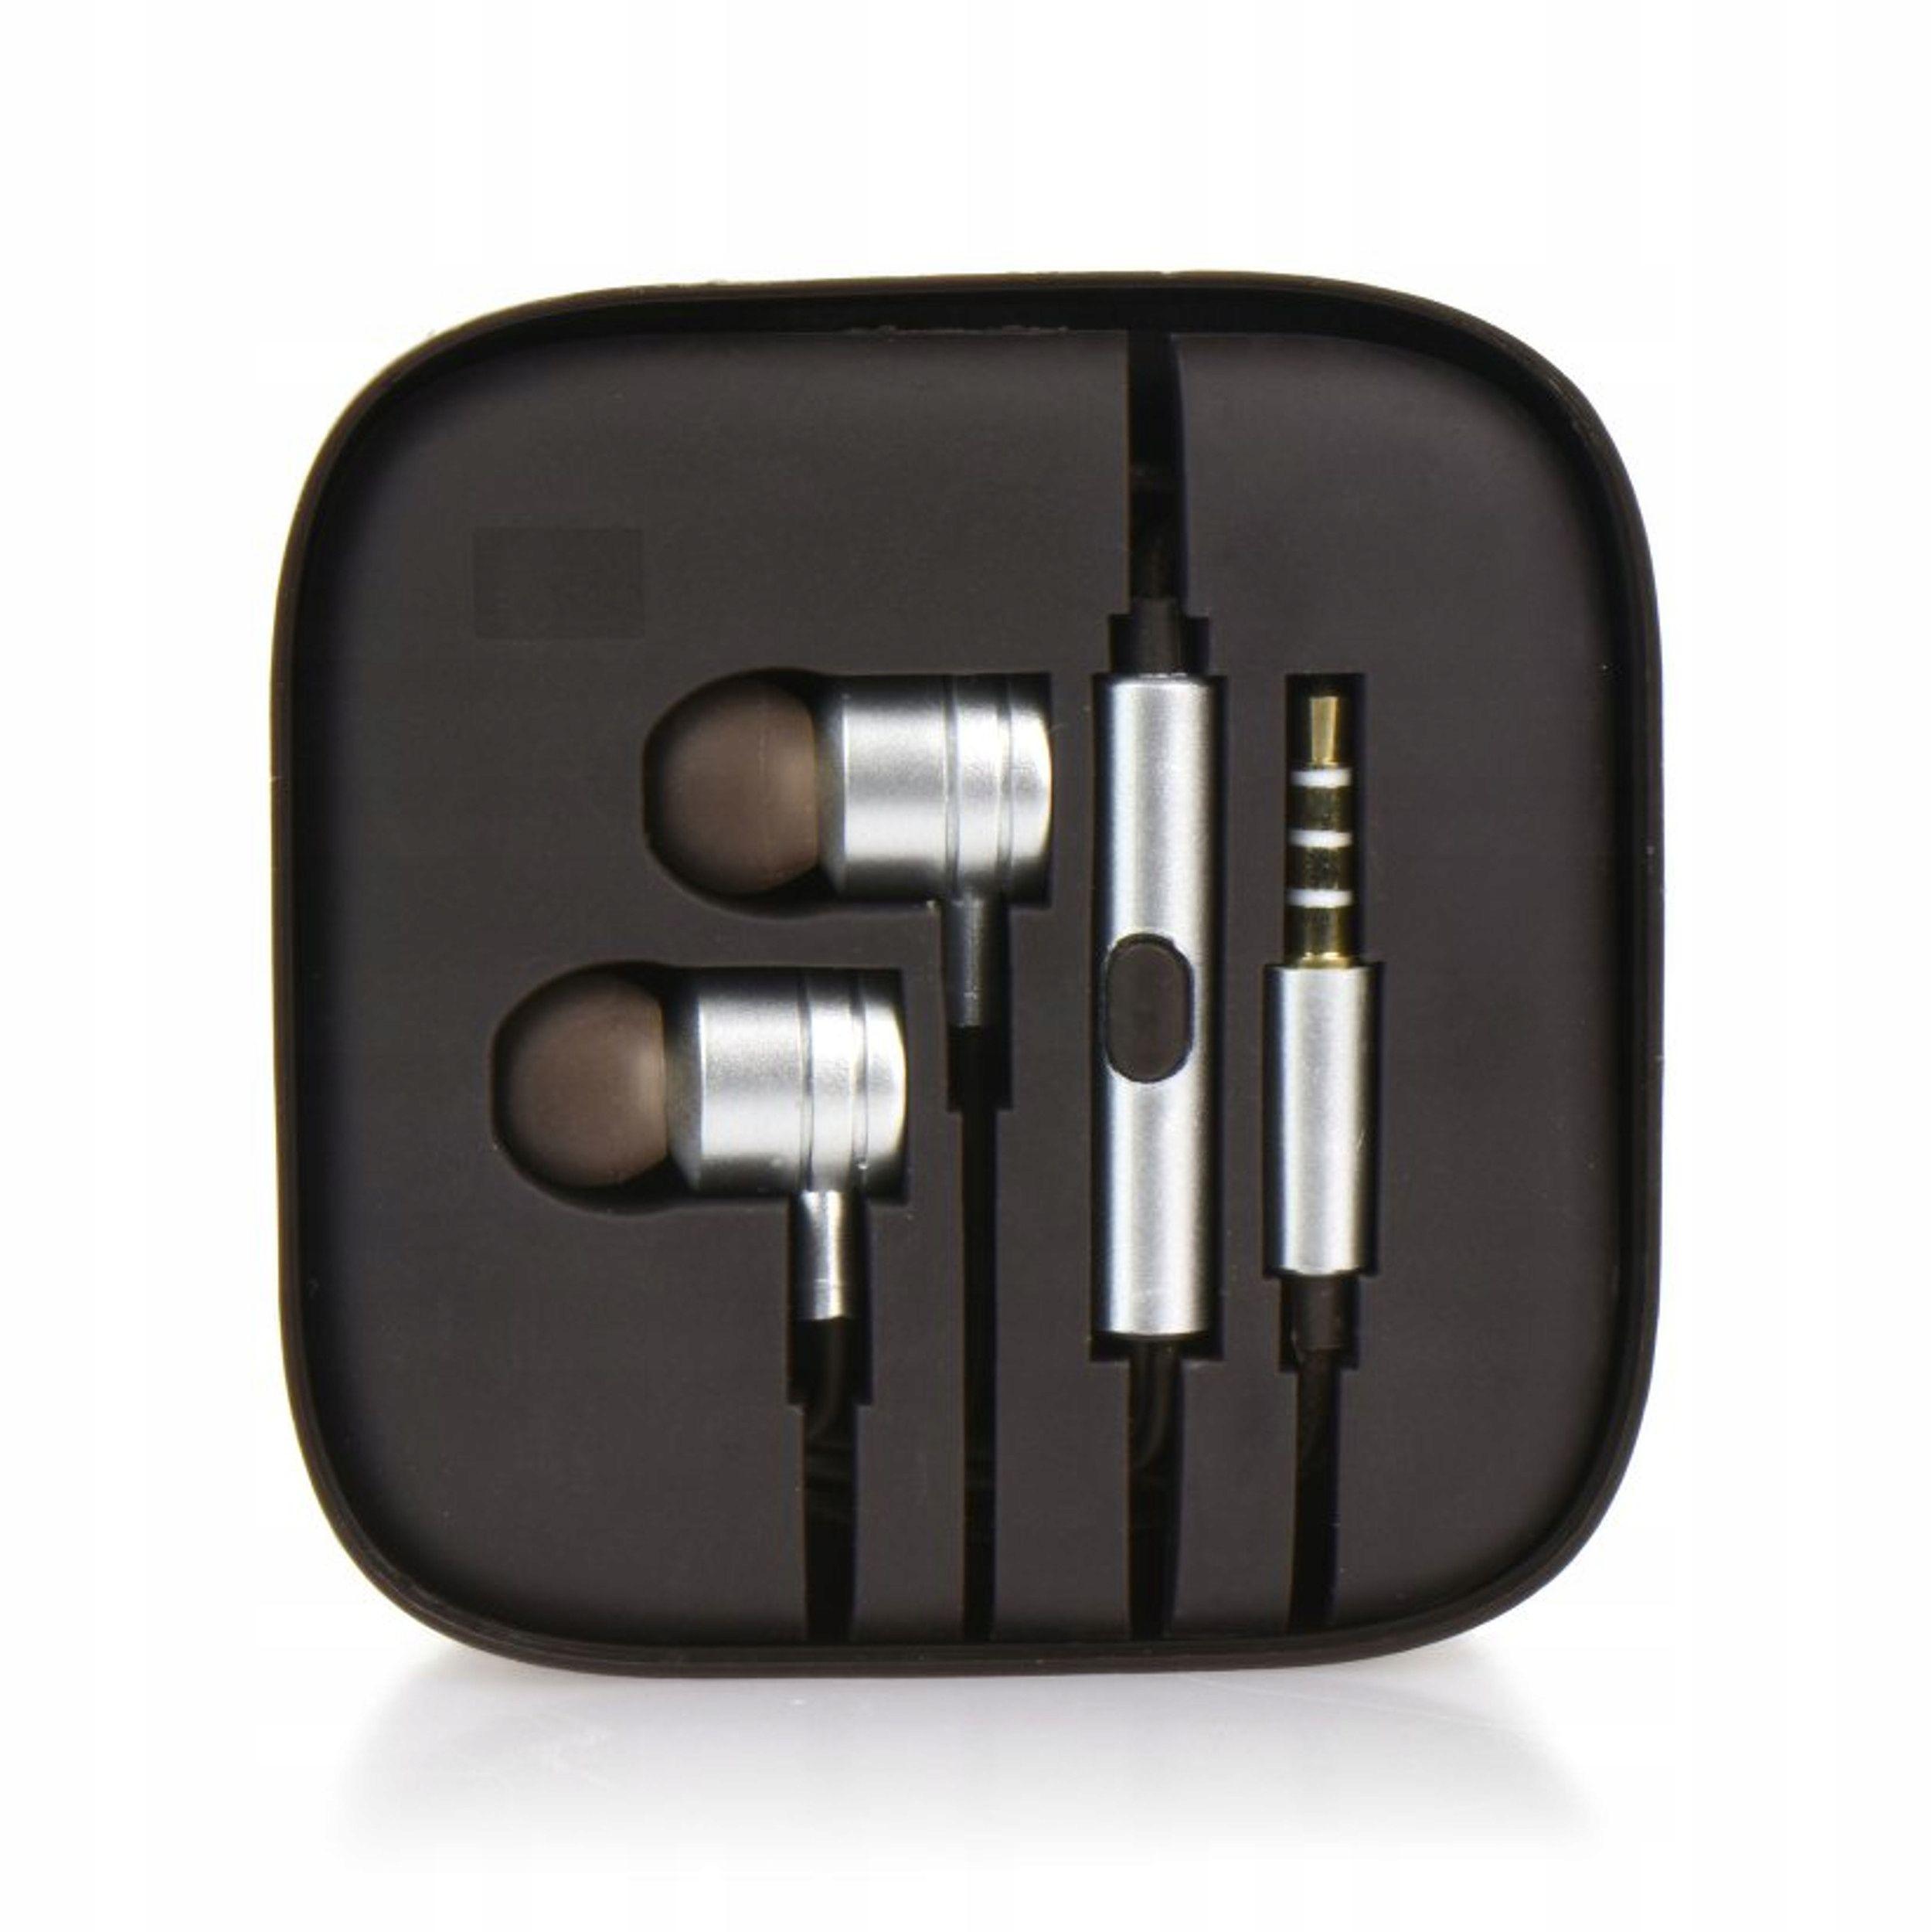 In-ear wired headphones - black and silver